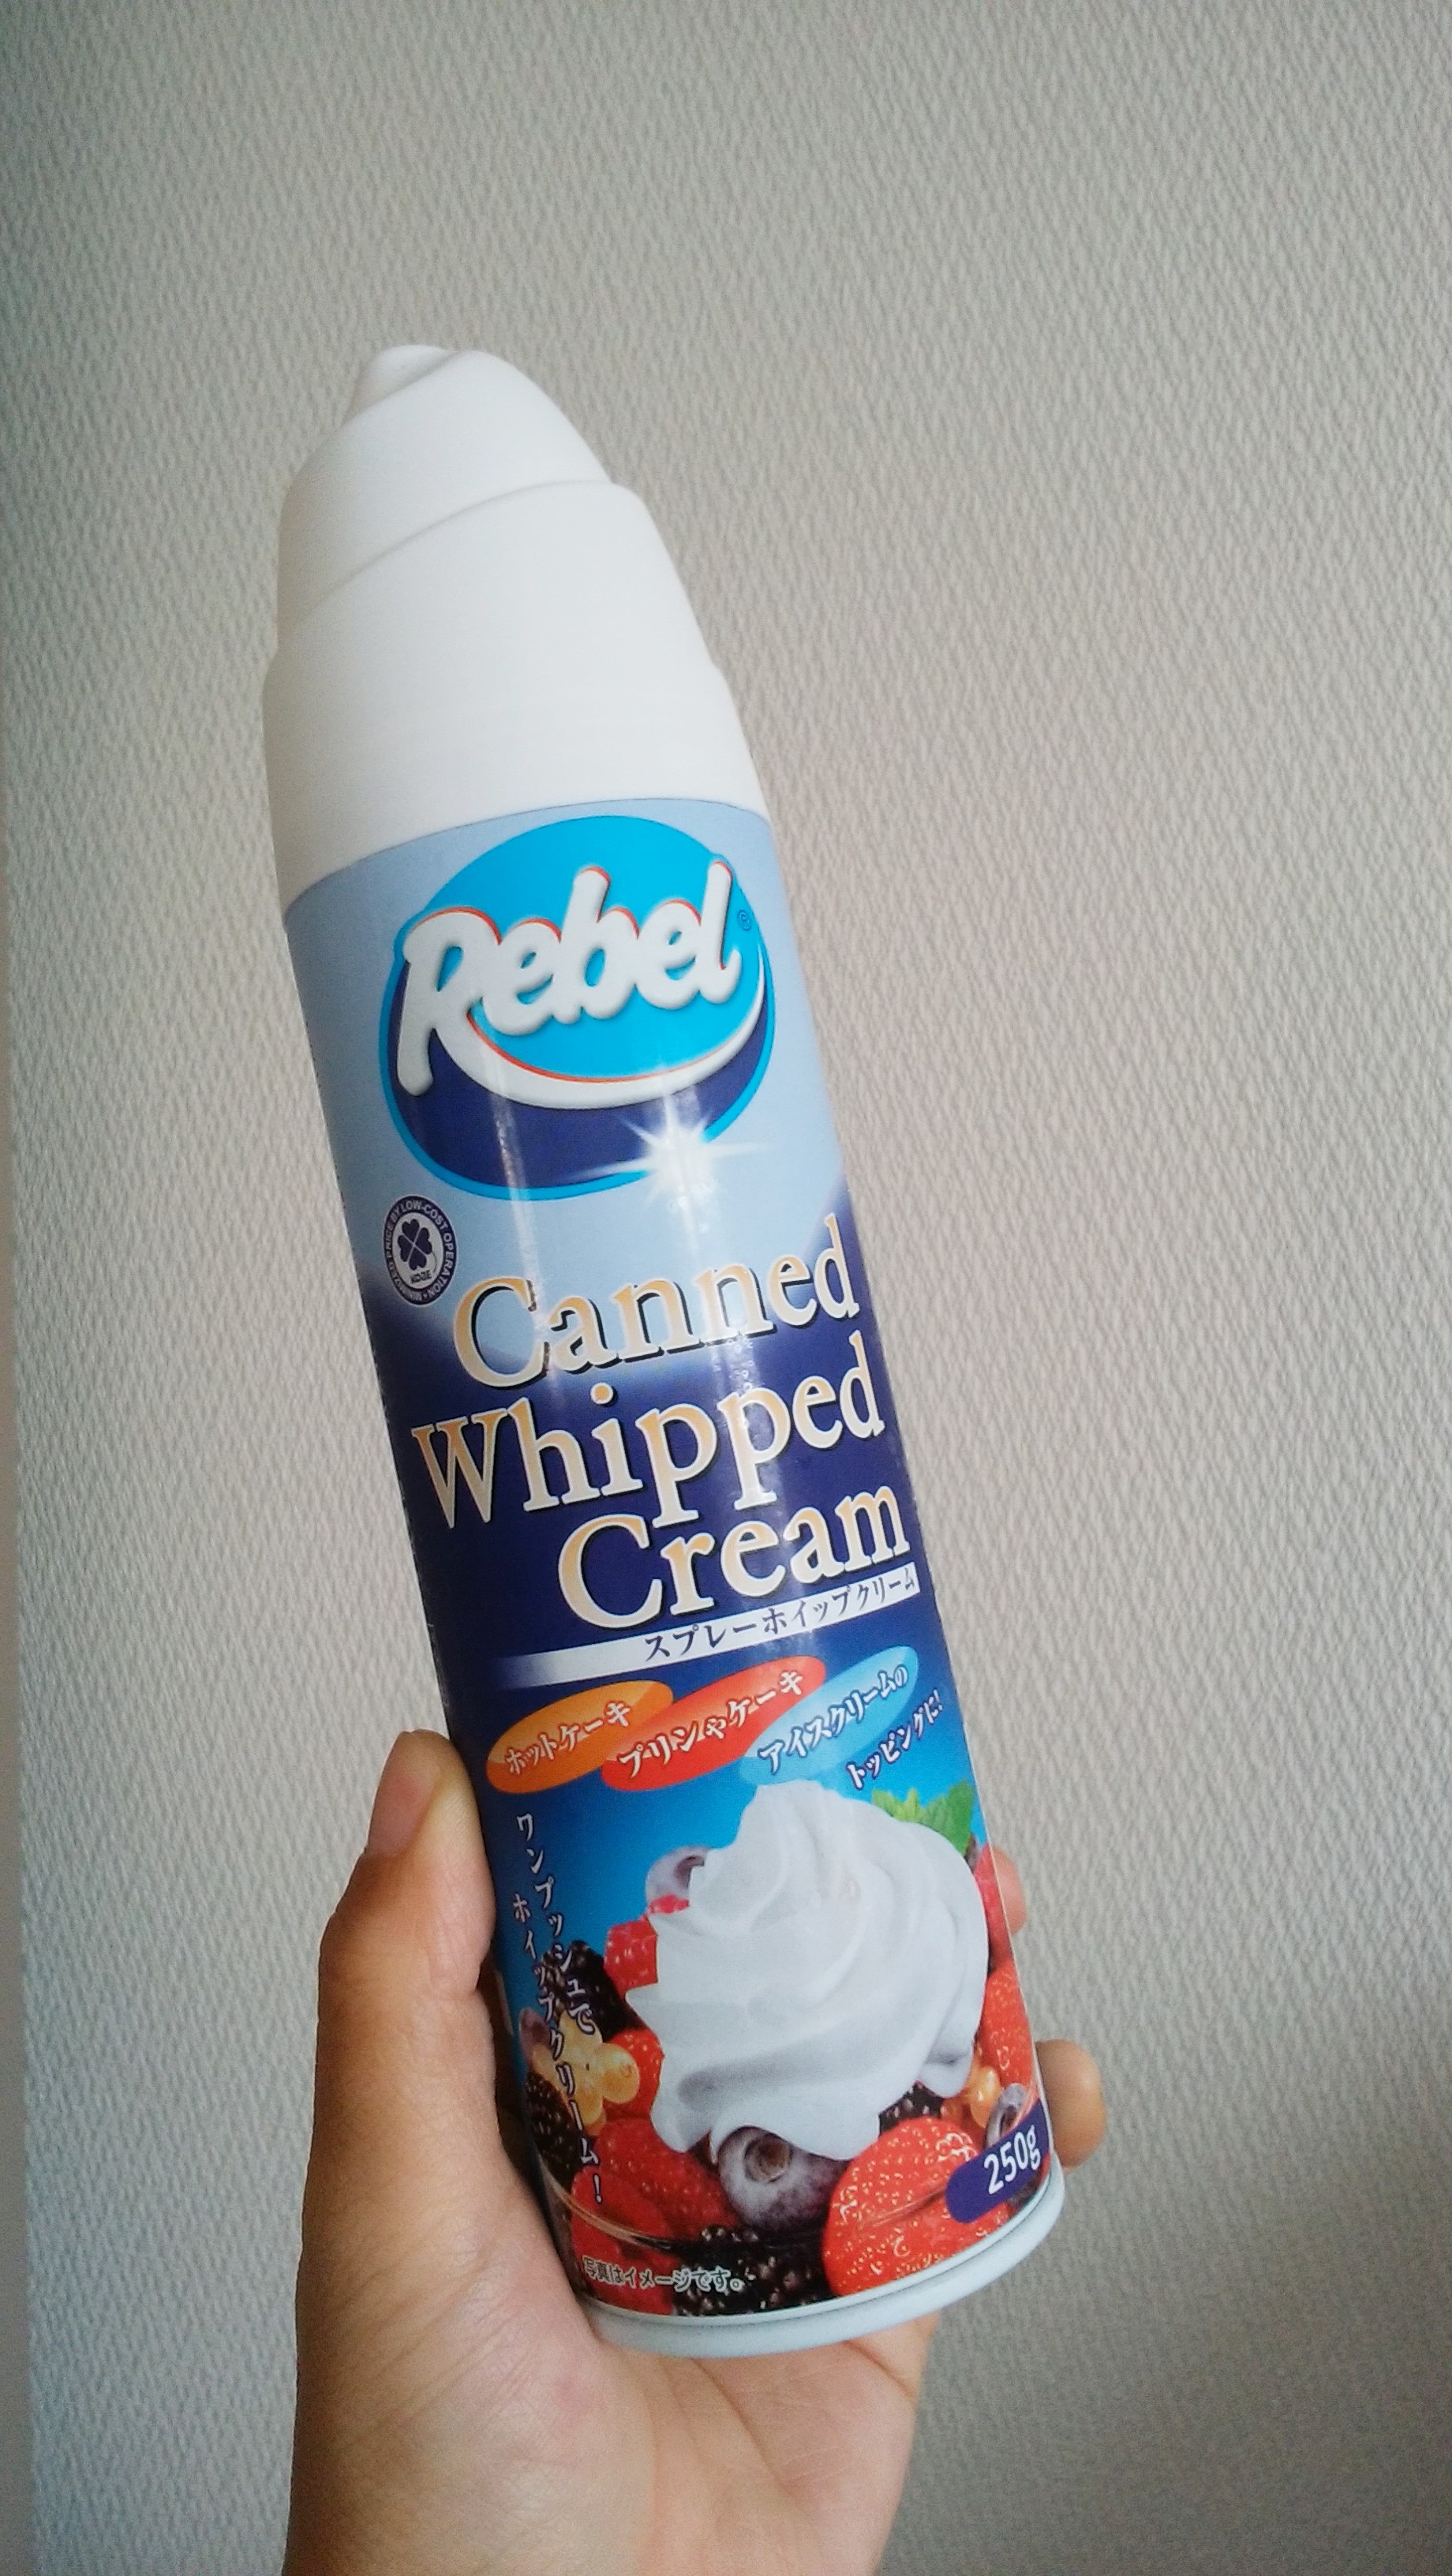 Rebel Canned Whipped Cream スプレーホイップクリーム 業務スーパー 賞味期限など